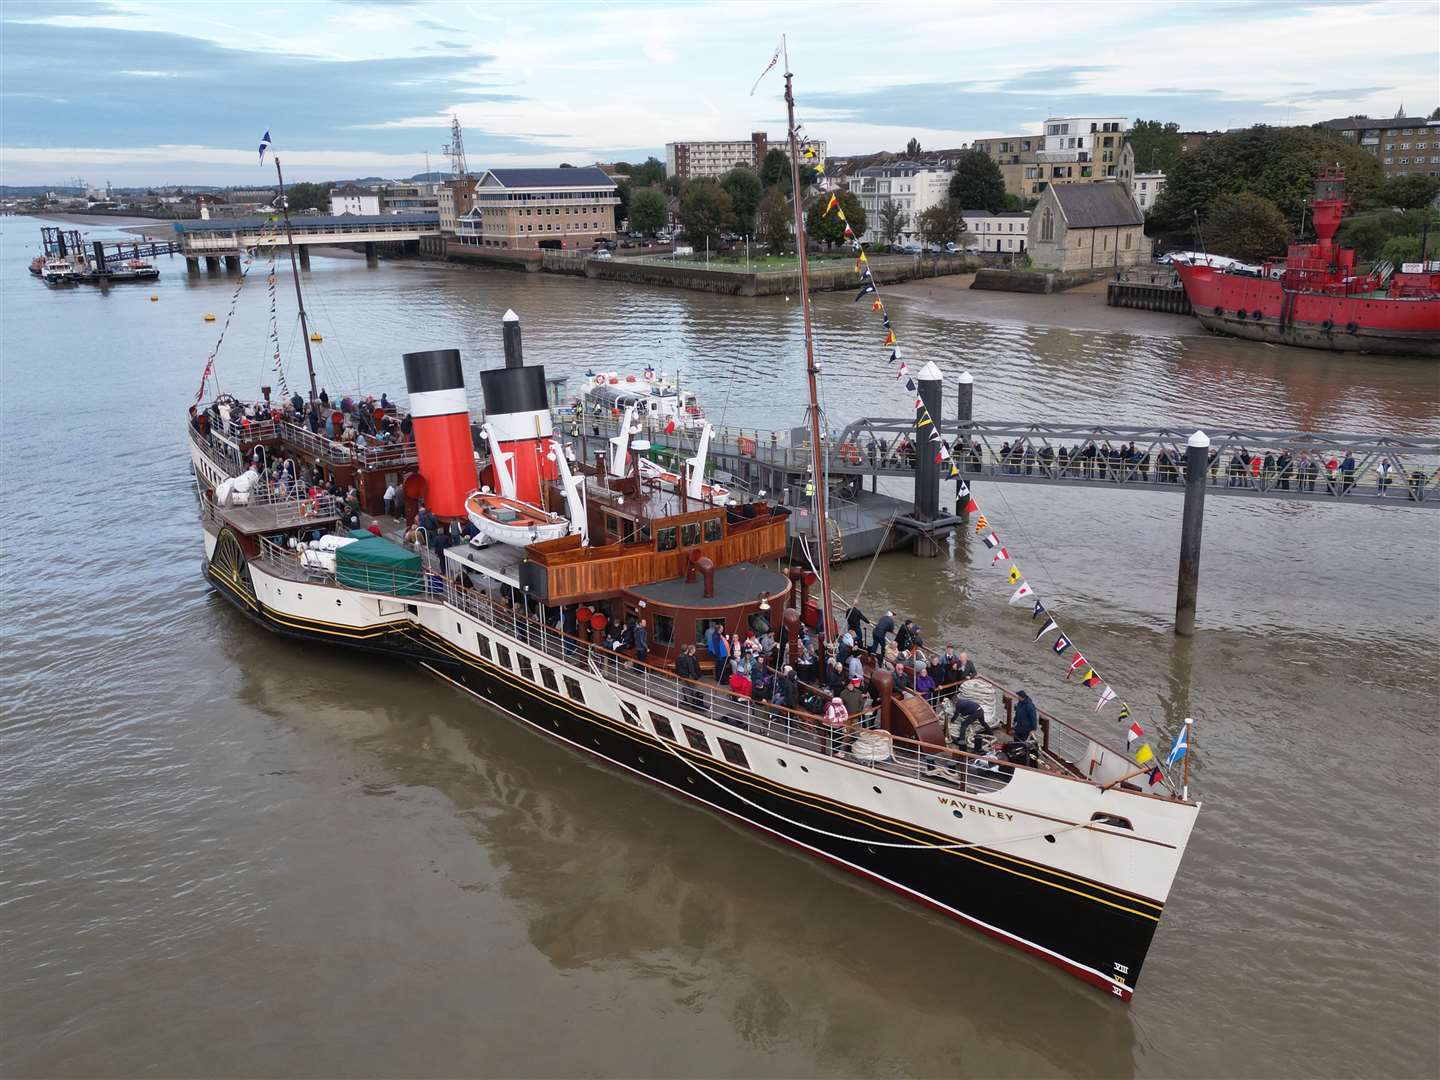 It offers a range of cruises up and down the Thames. Picture: Jason Arthur